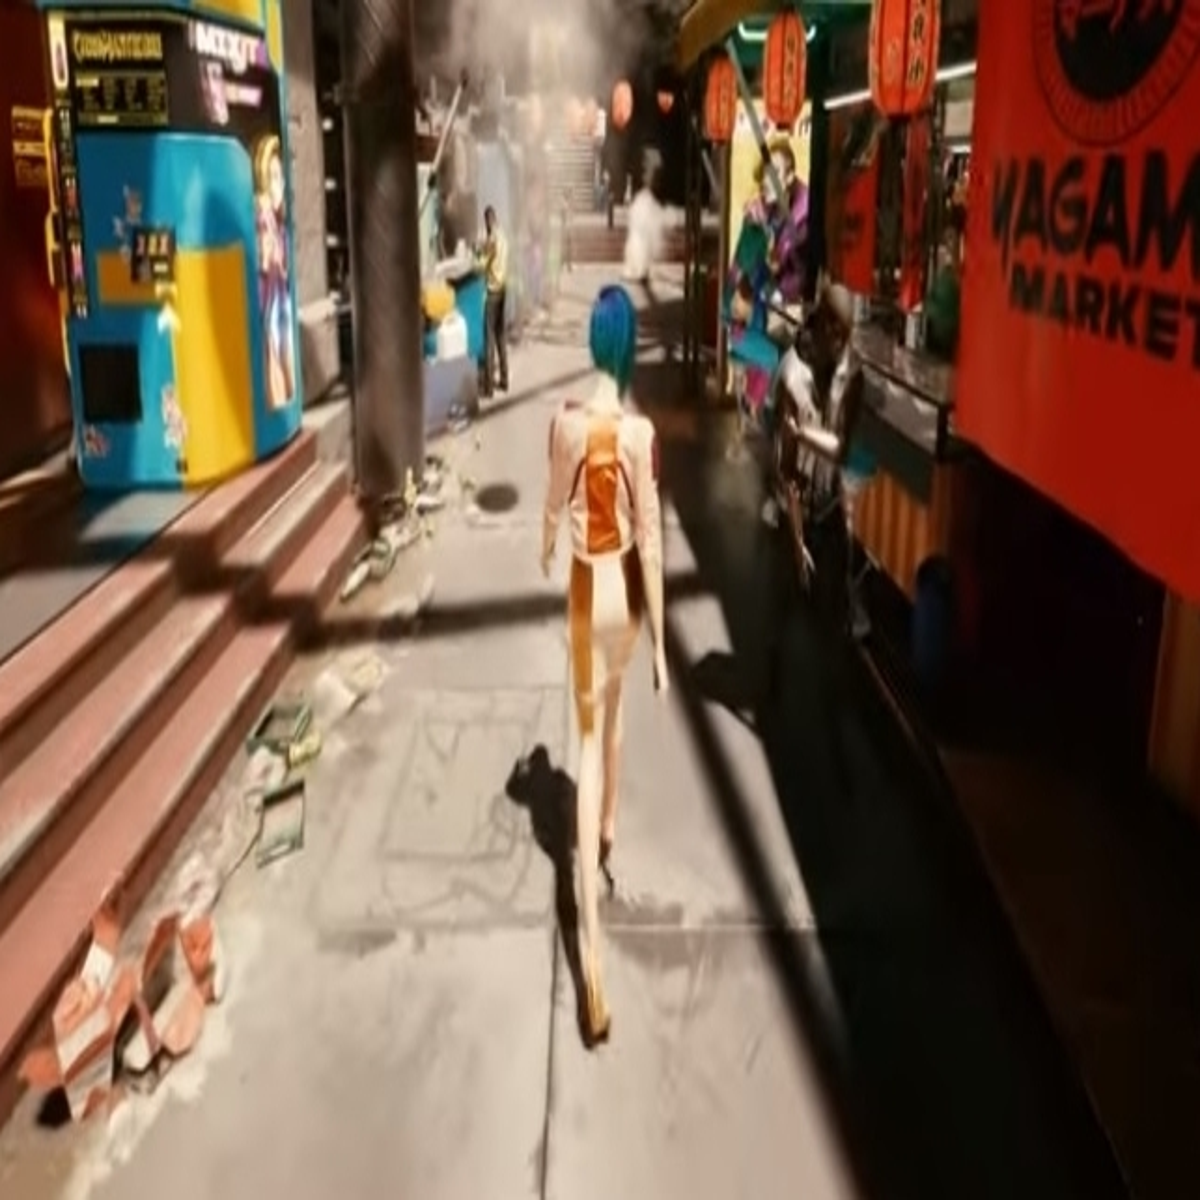 V's Running Animation In Cyberpunk 2077 Looks A Whole Lot Like Woody From  Toy Story